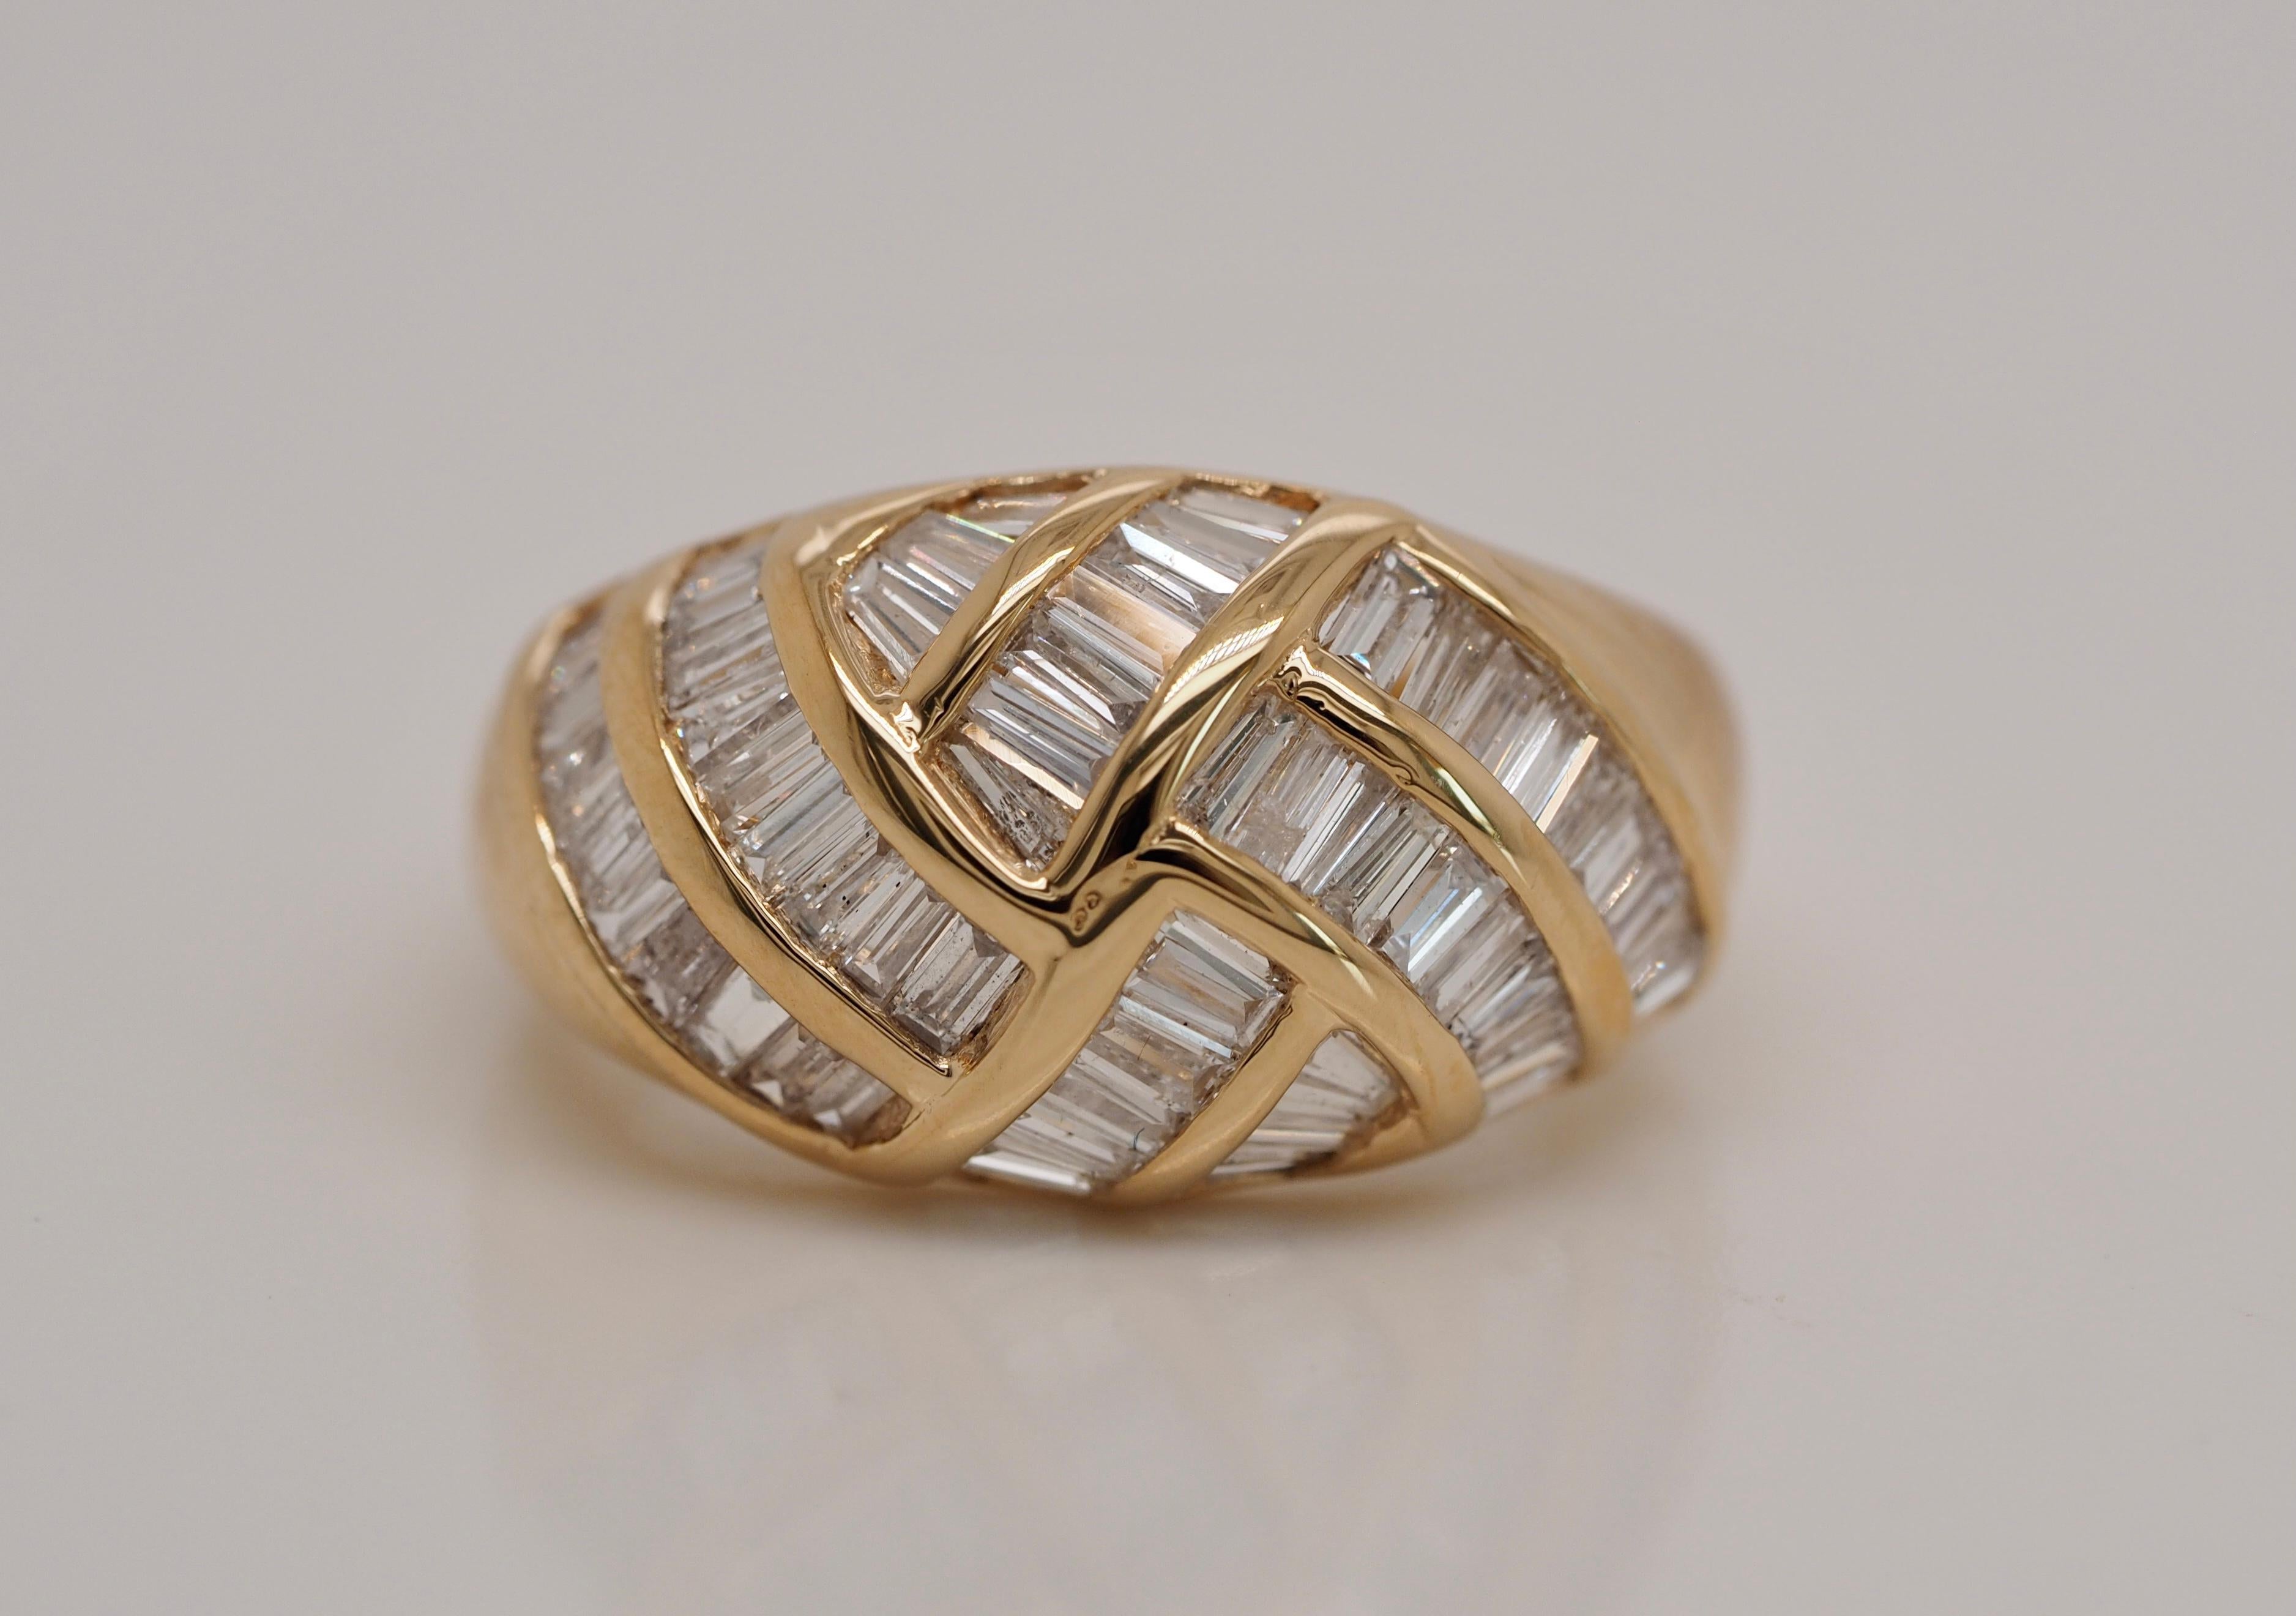 14 Karat Yellow Gold Diamond Baguette ring! This retro-vintage style is an absolute must. Its is perfect for every occasion. The baguette diamonds are set in a diagnal design creating an incredible brilliance. This a a true classic ring that will